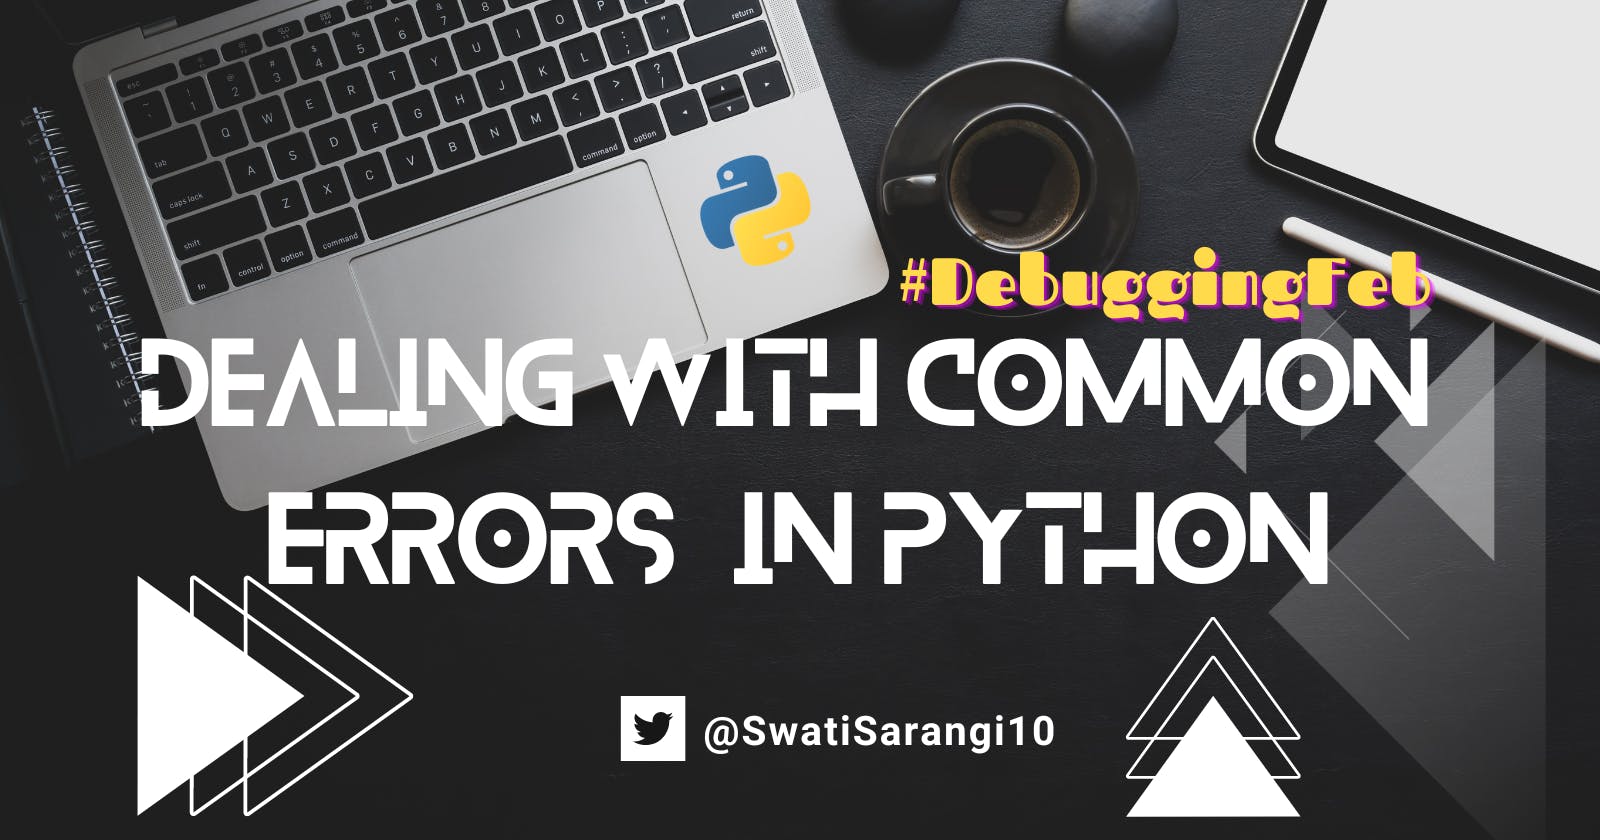 Dealing with common errors in Python